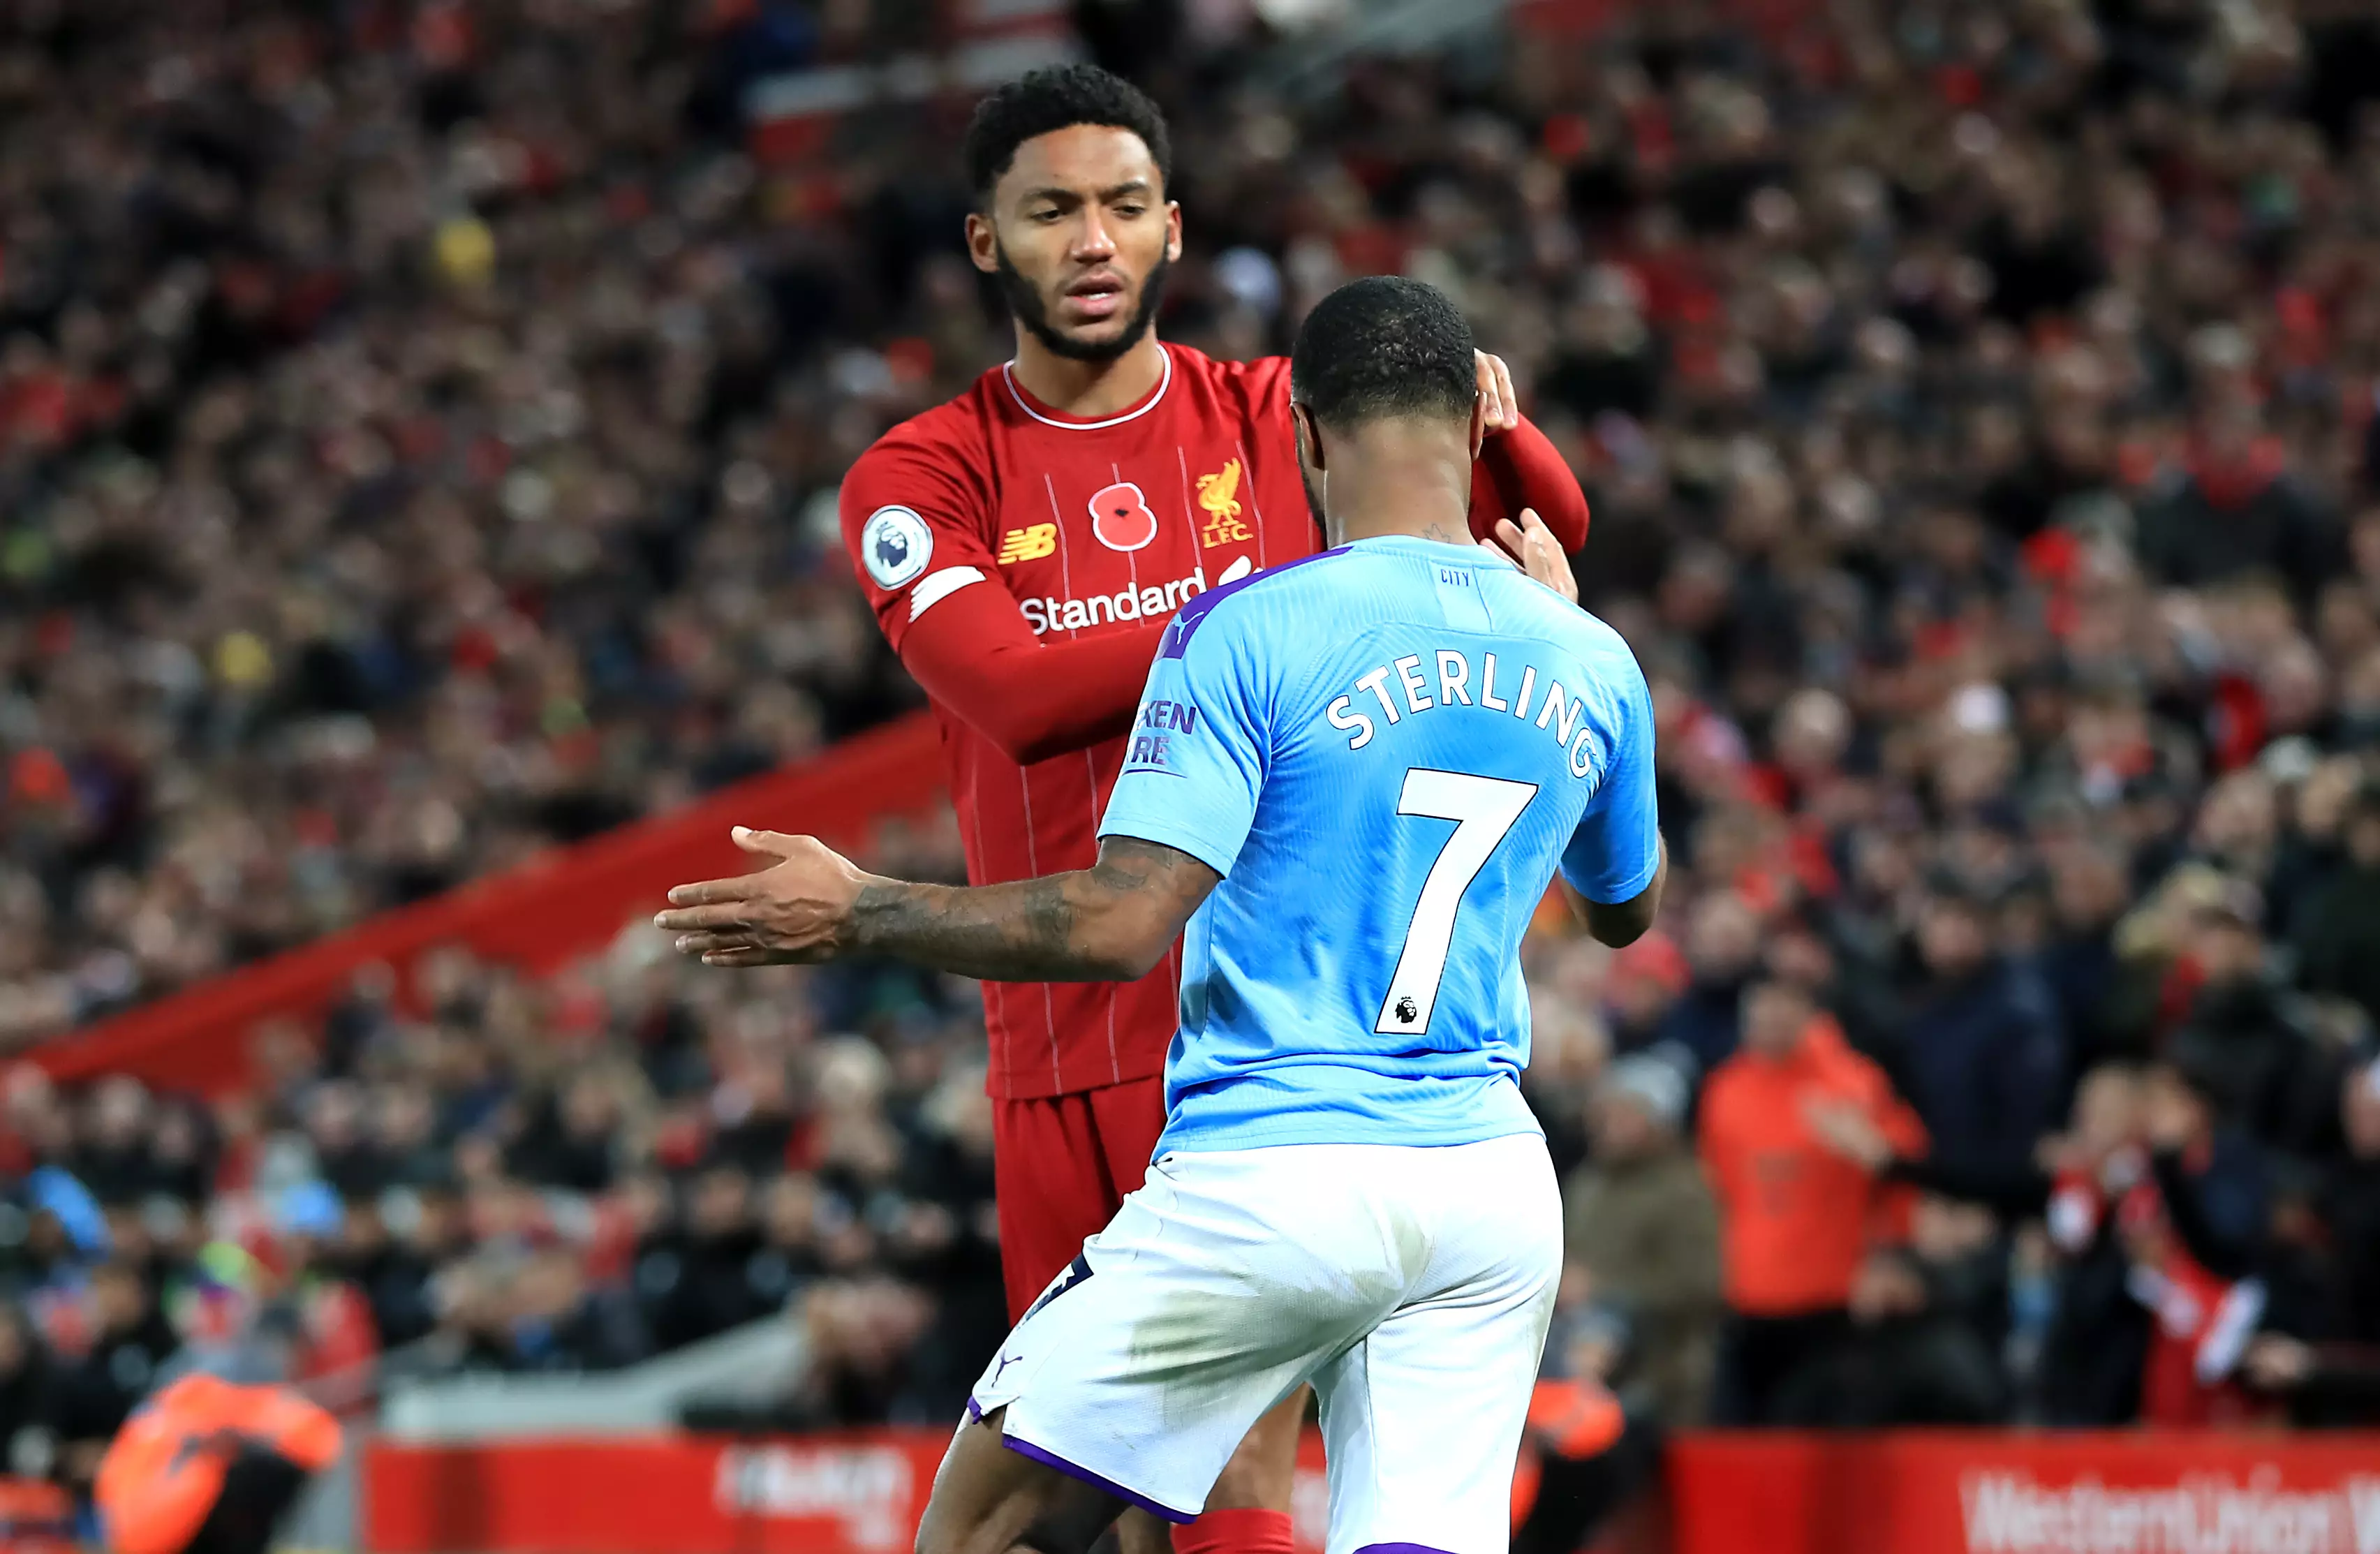 Sterling and Gomez clash during the big game on Sunday. Image: PA Images